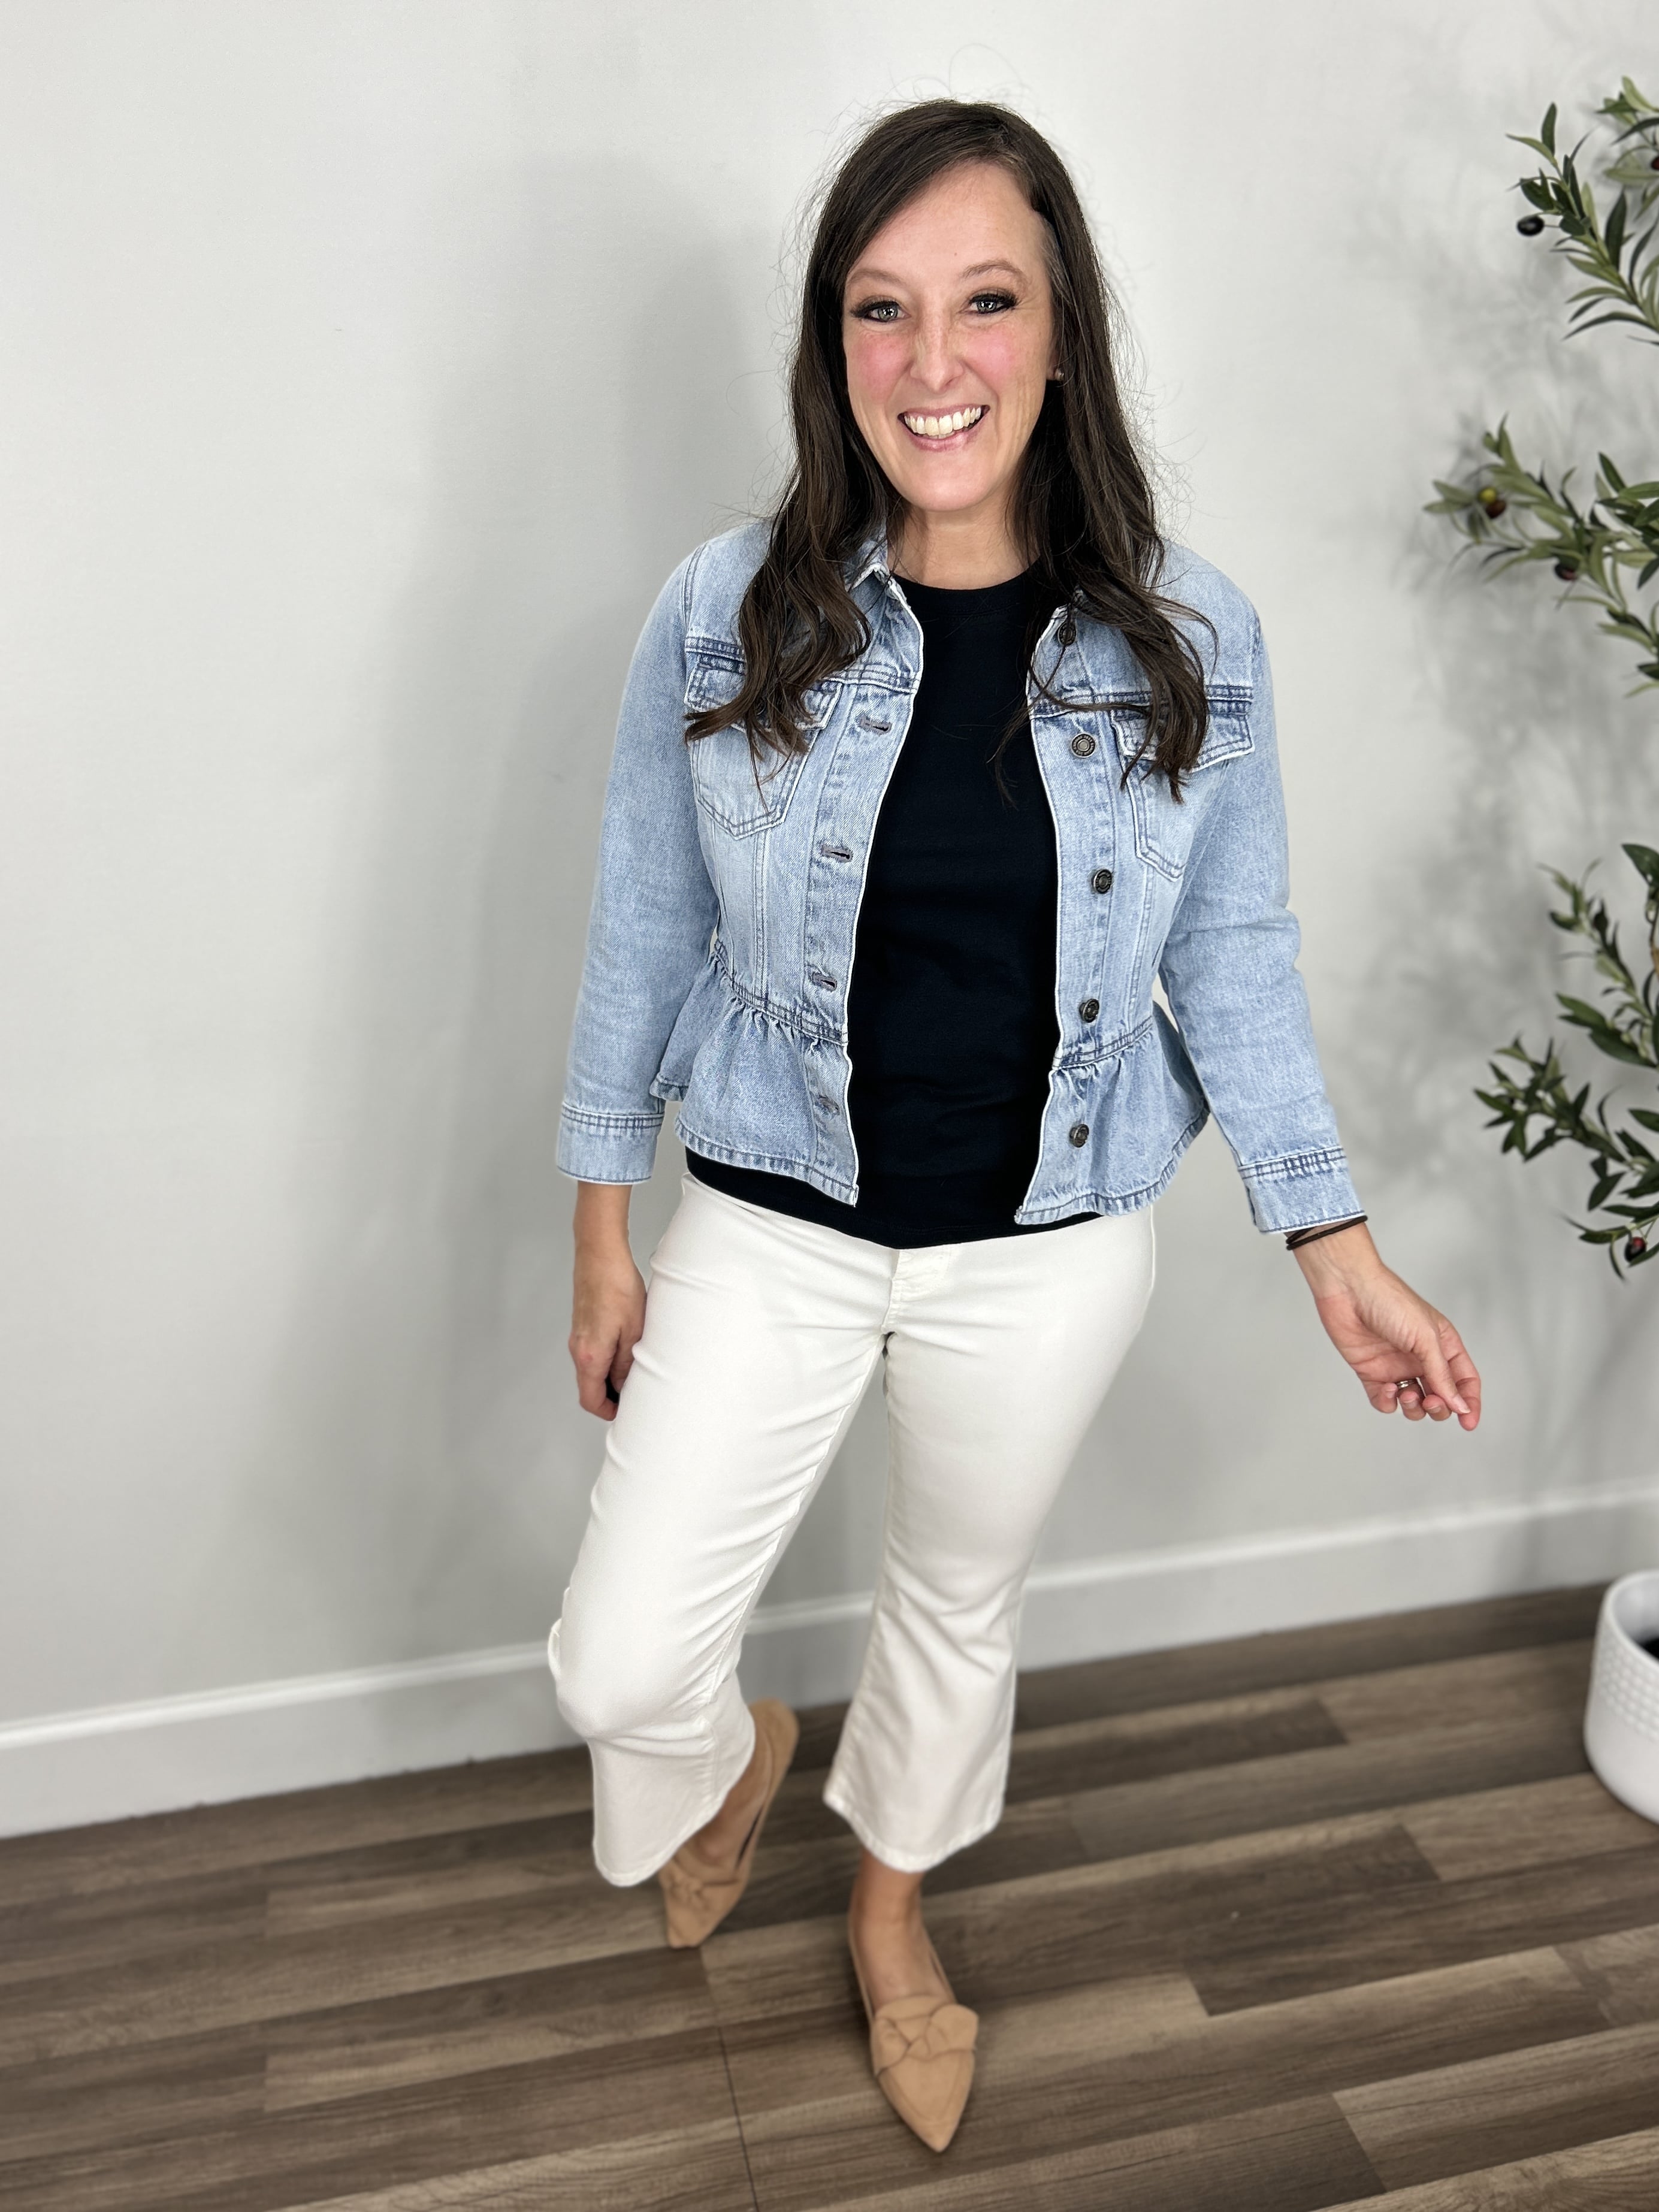 Outfit styled with the Emma Peplum Lightwash Denim jacket. Layered with a black tee shirt and paired with white crop flare pants.